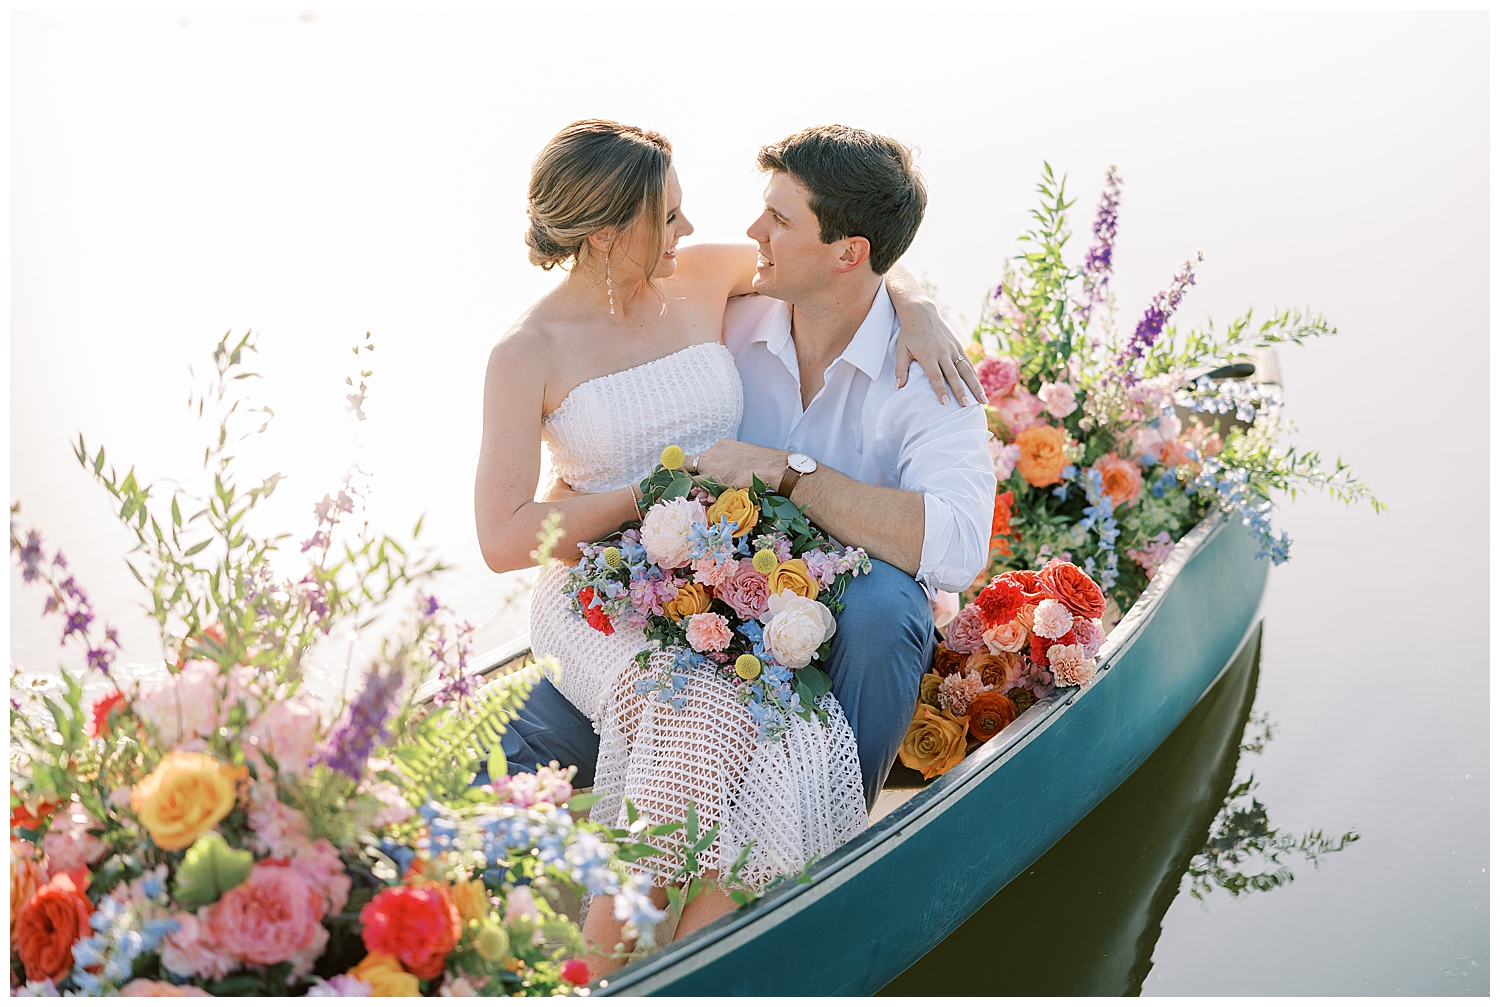 A couple rides in a canoe in the middle of a lake surrounded by flowers.